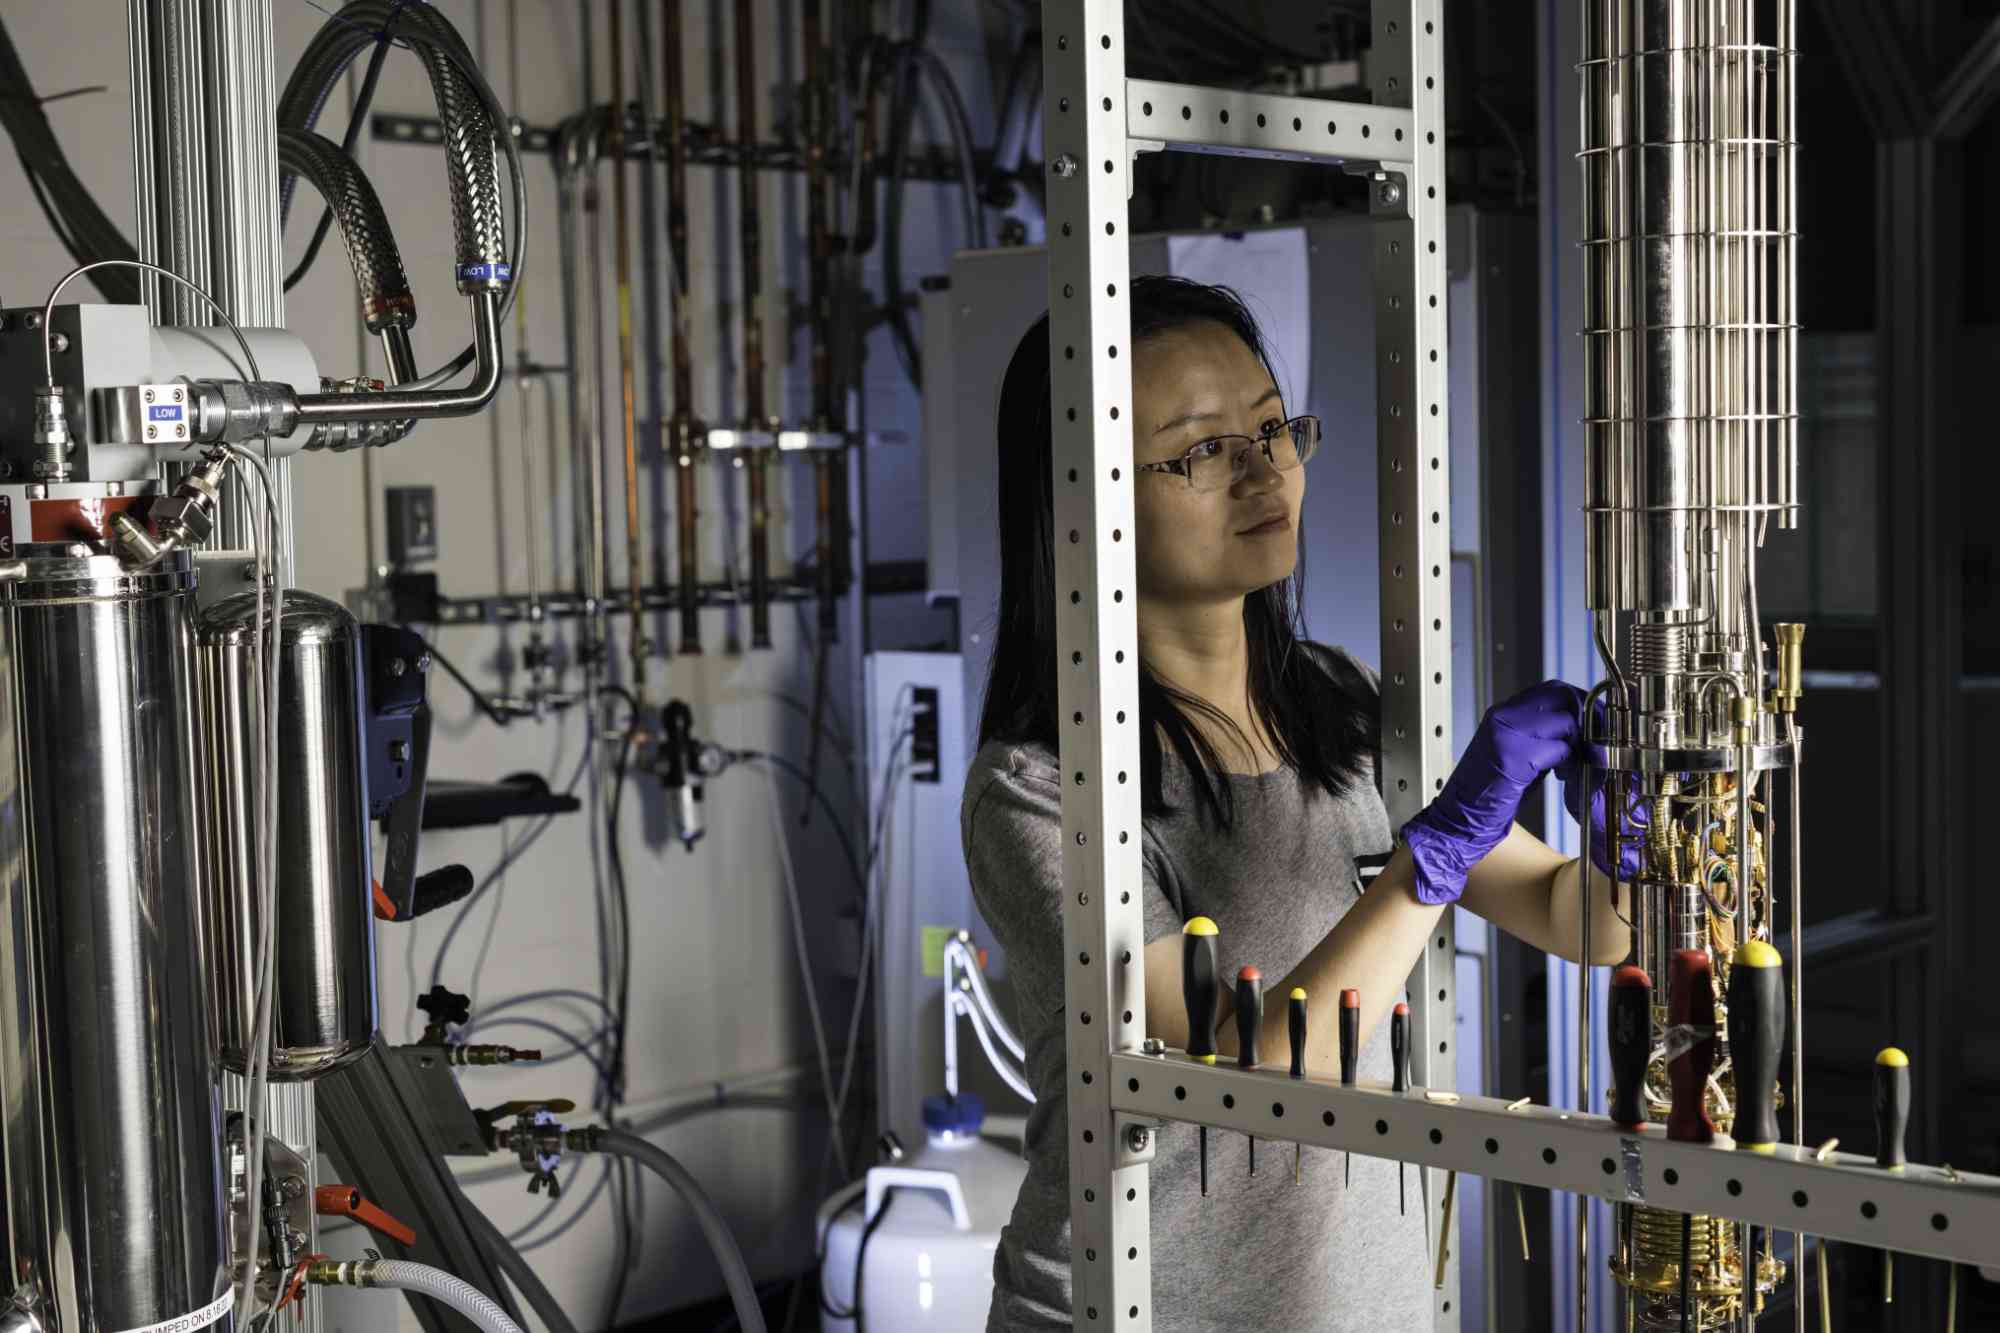 Xinxin Cai studies thermoelectricity using a dilution refrigerator in the lab of John Nichol.